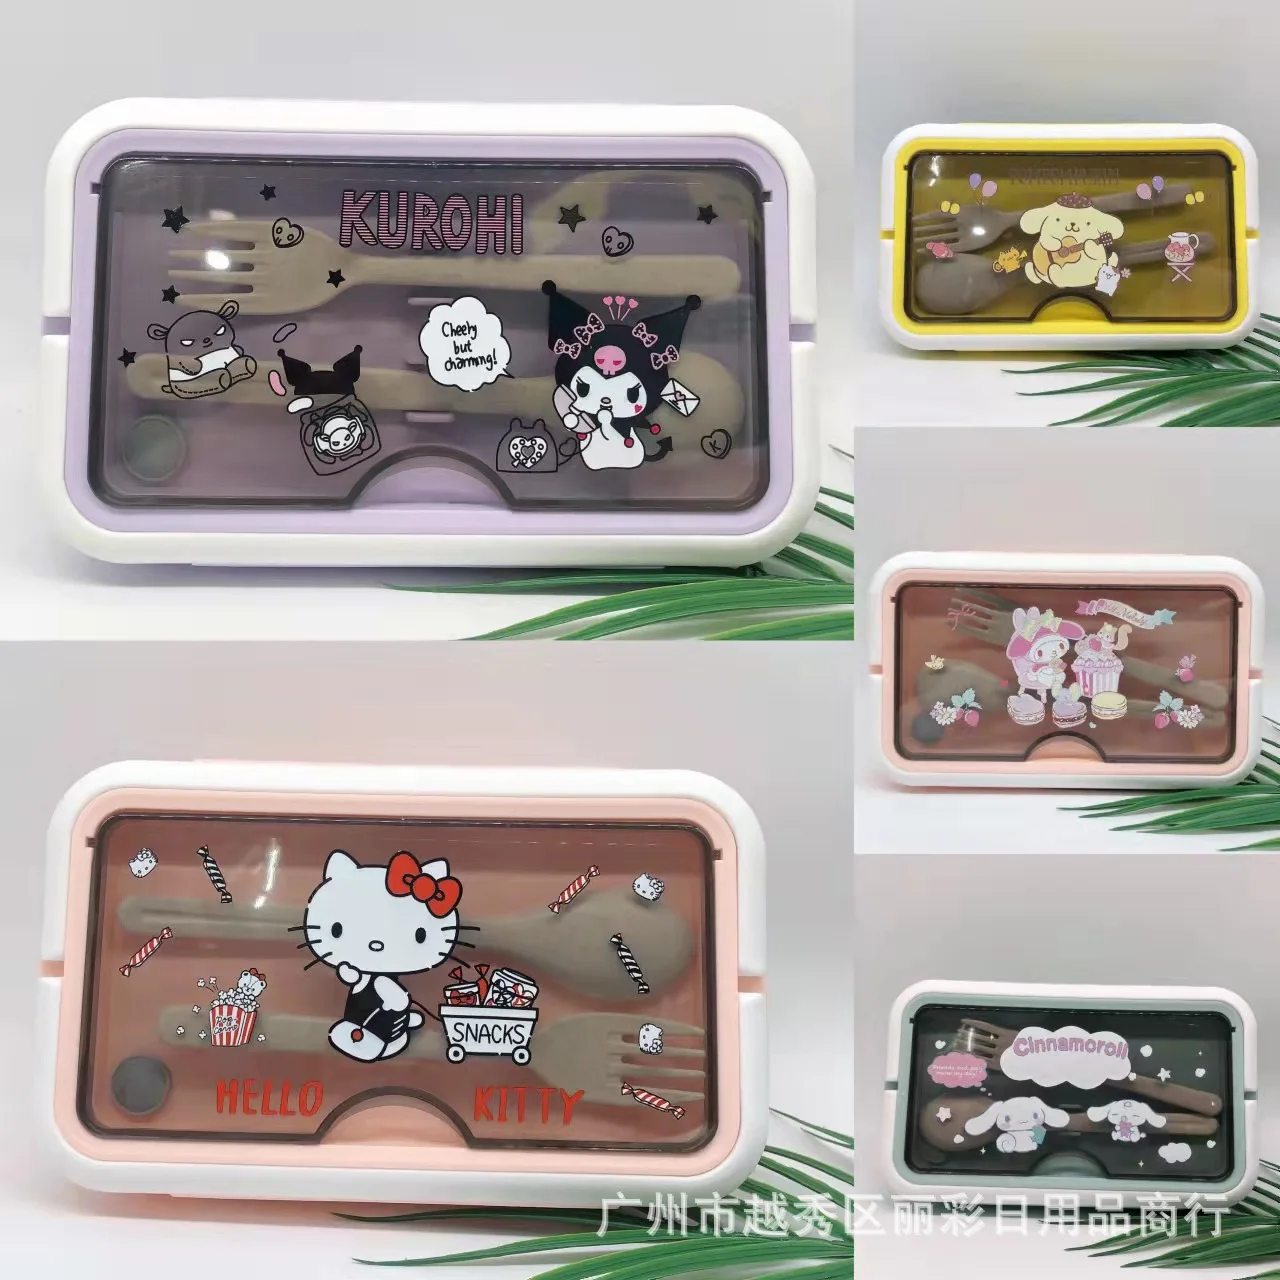 Portable Cute Sanrio Mymelody Microwave Oven Japanese Cutlery Split Handle Lunch Box Plastic Square Snack Box Students Box primary school students tianzi grid pinyin book math new word square japanese homework wholesale standard first grade